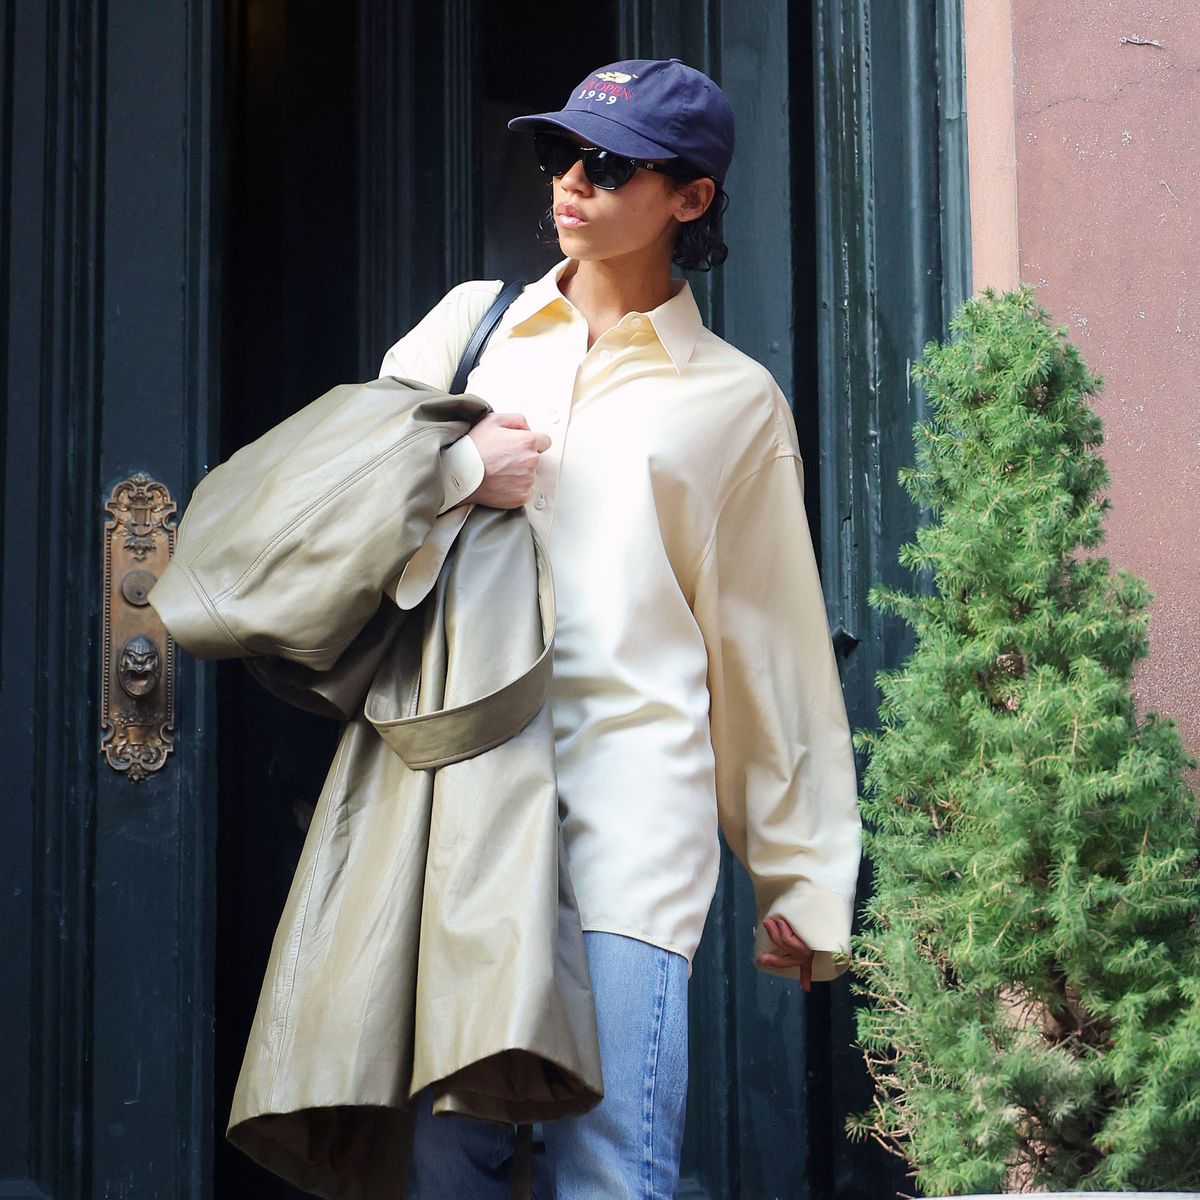  It's True—Celebrities Always Rely On This Flat Shoe to Elevate Their Simple Jeans Outfits 